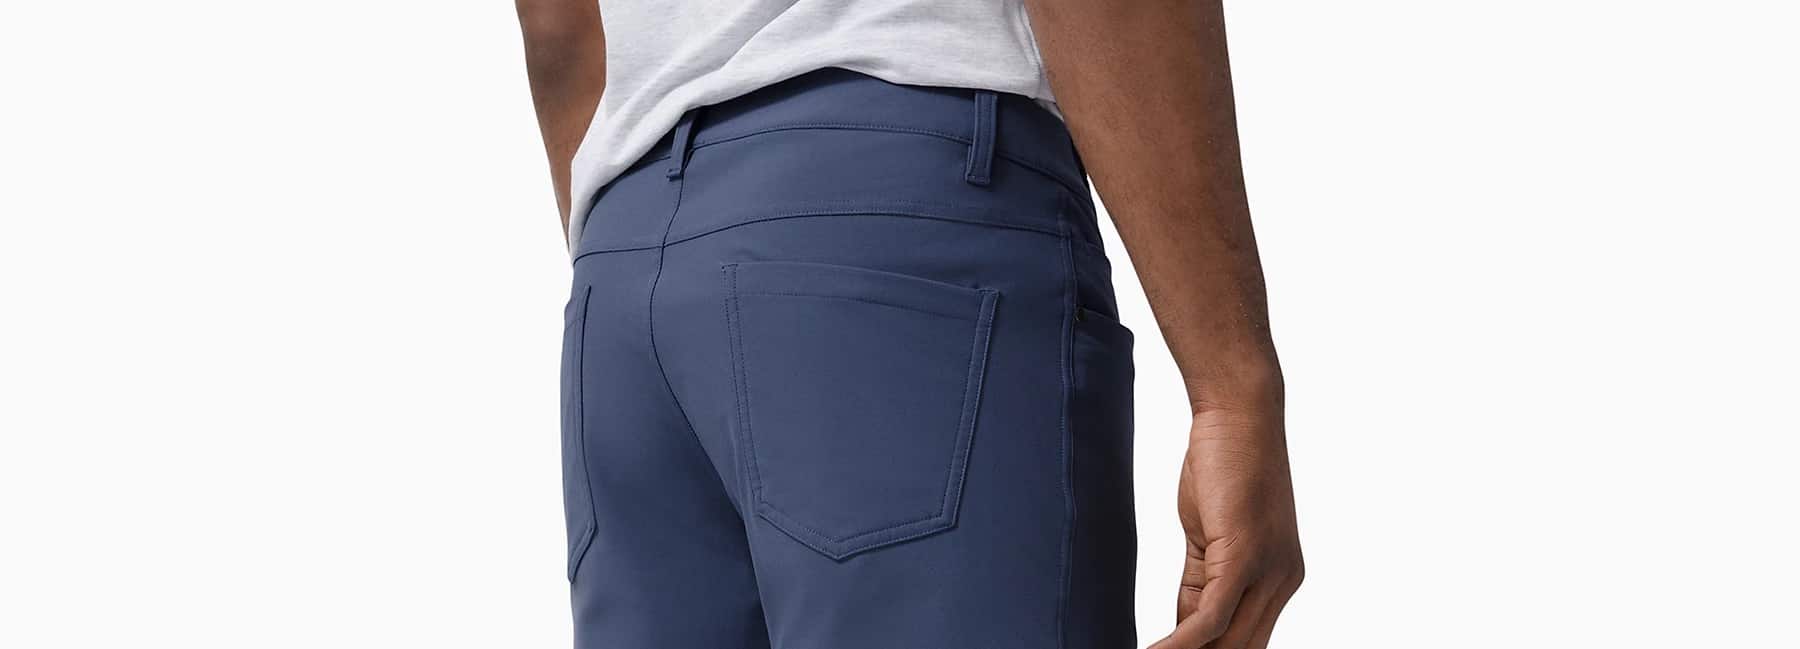 ABC Pant Review - God's gift to men? Or expensive marketing gimmick? 5